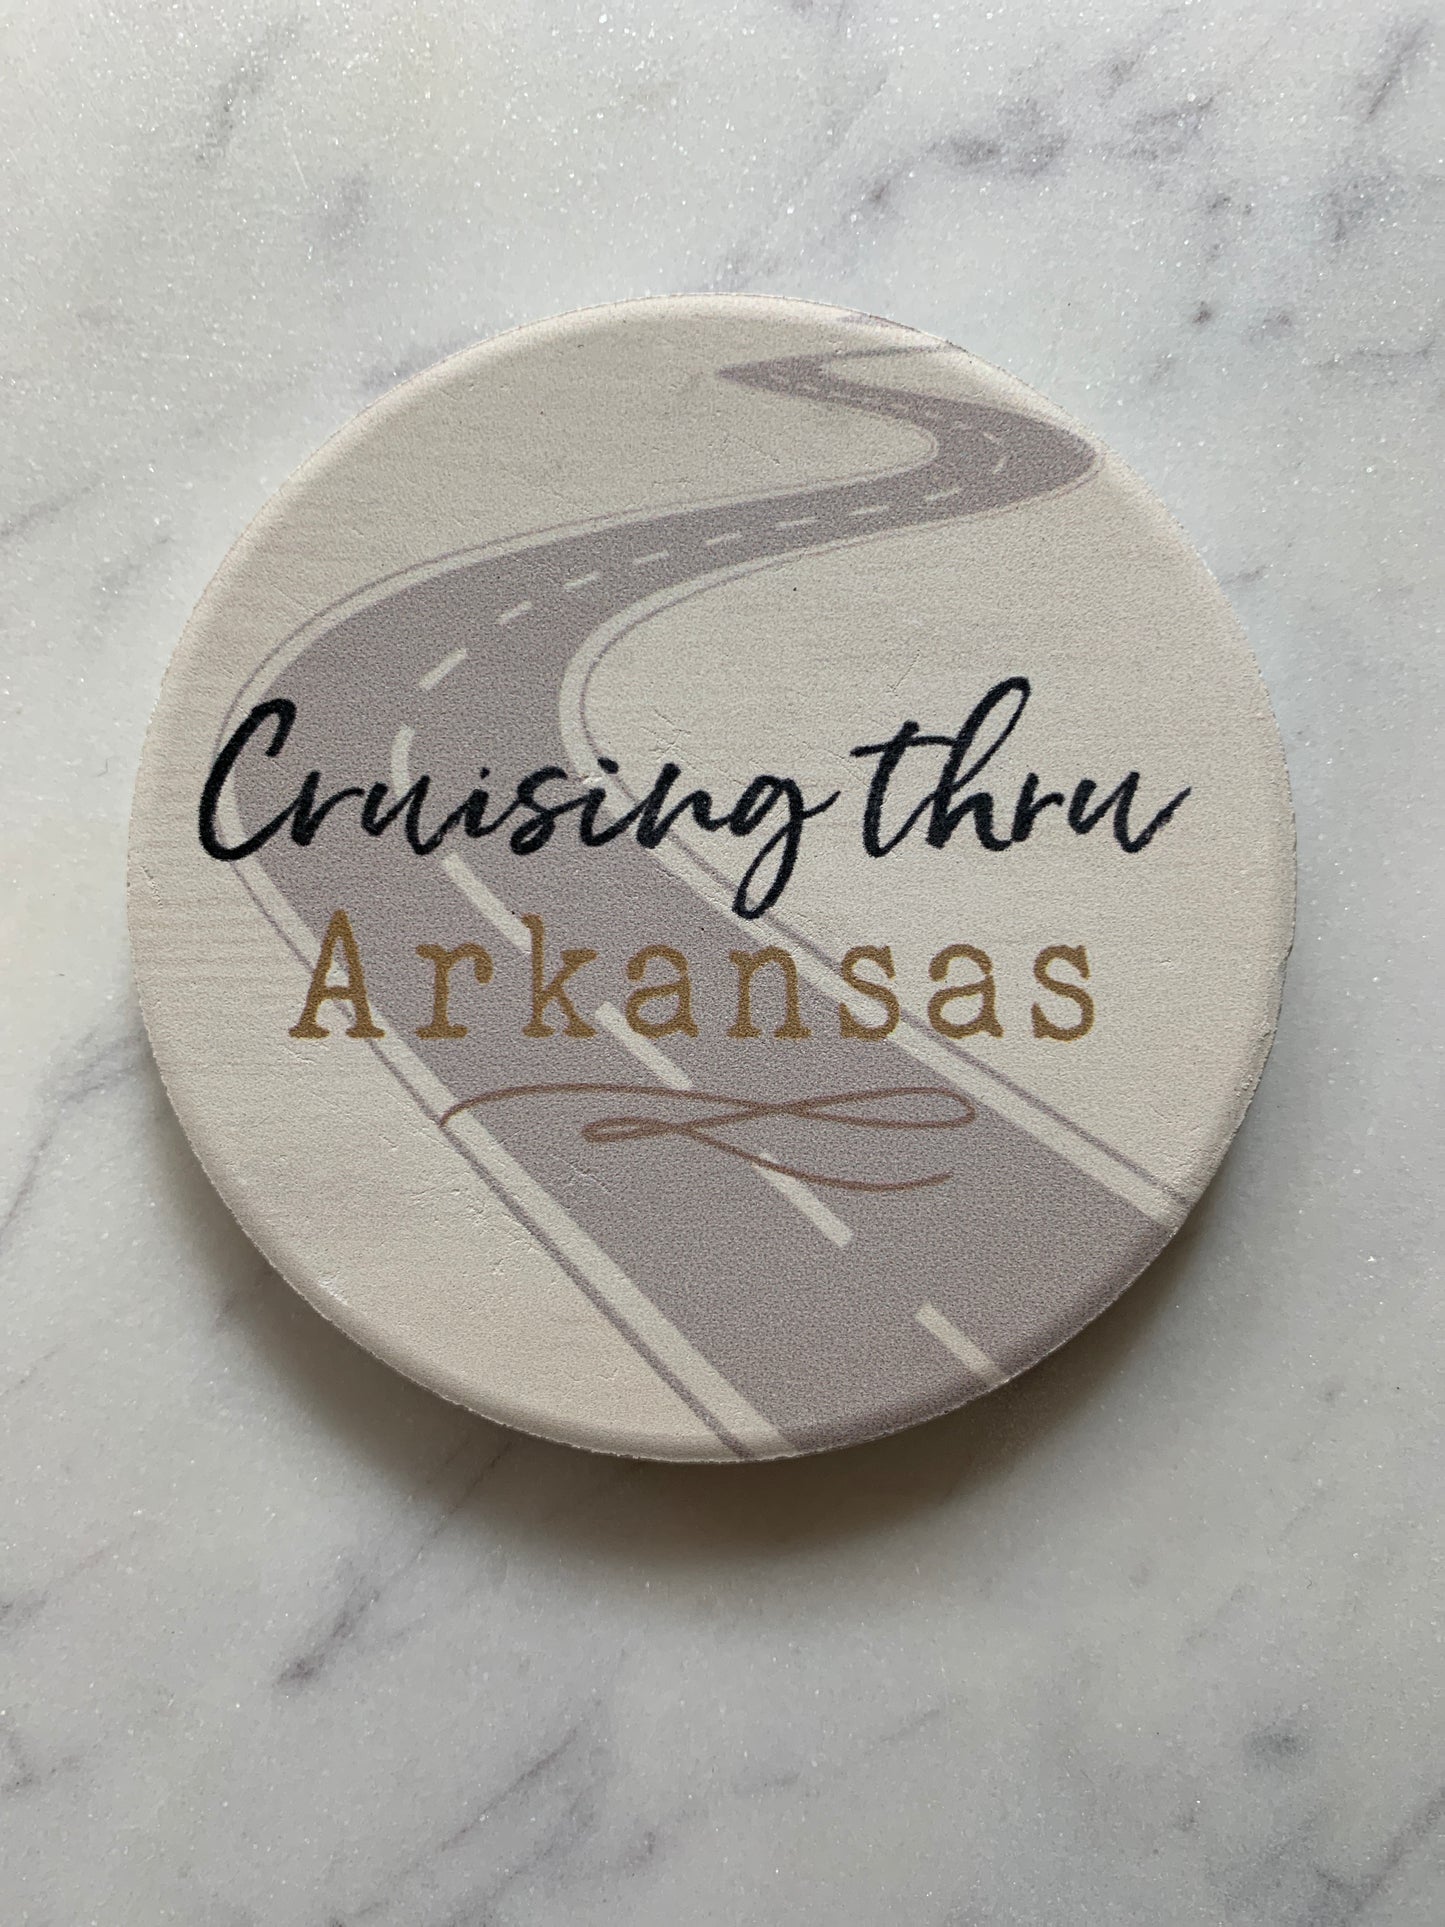 cruising thru arkansas car coaster is beige with a gray road across it and text in black and gold displayed on a gray and white marble surface